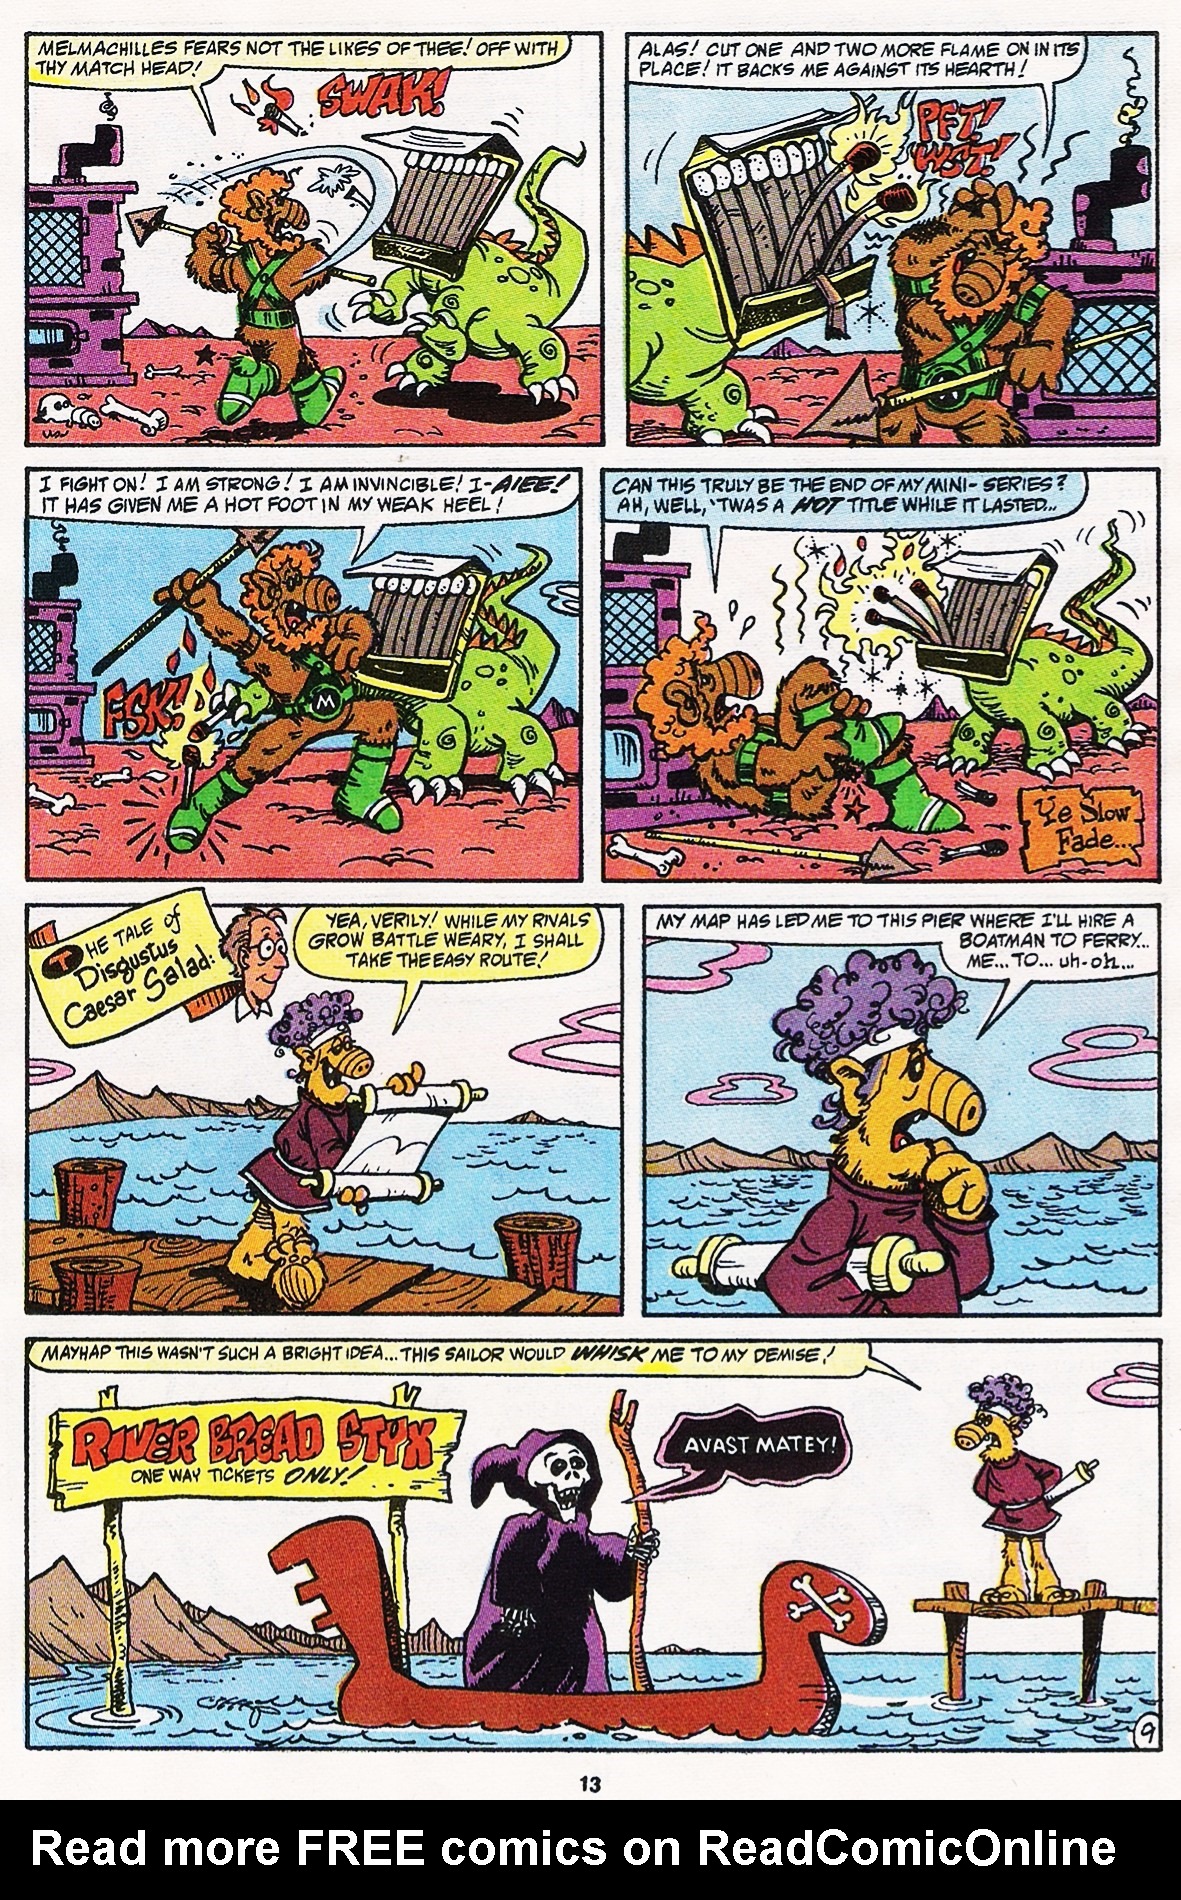 Read online ALF comic -  Issue #33 - 15